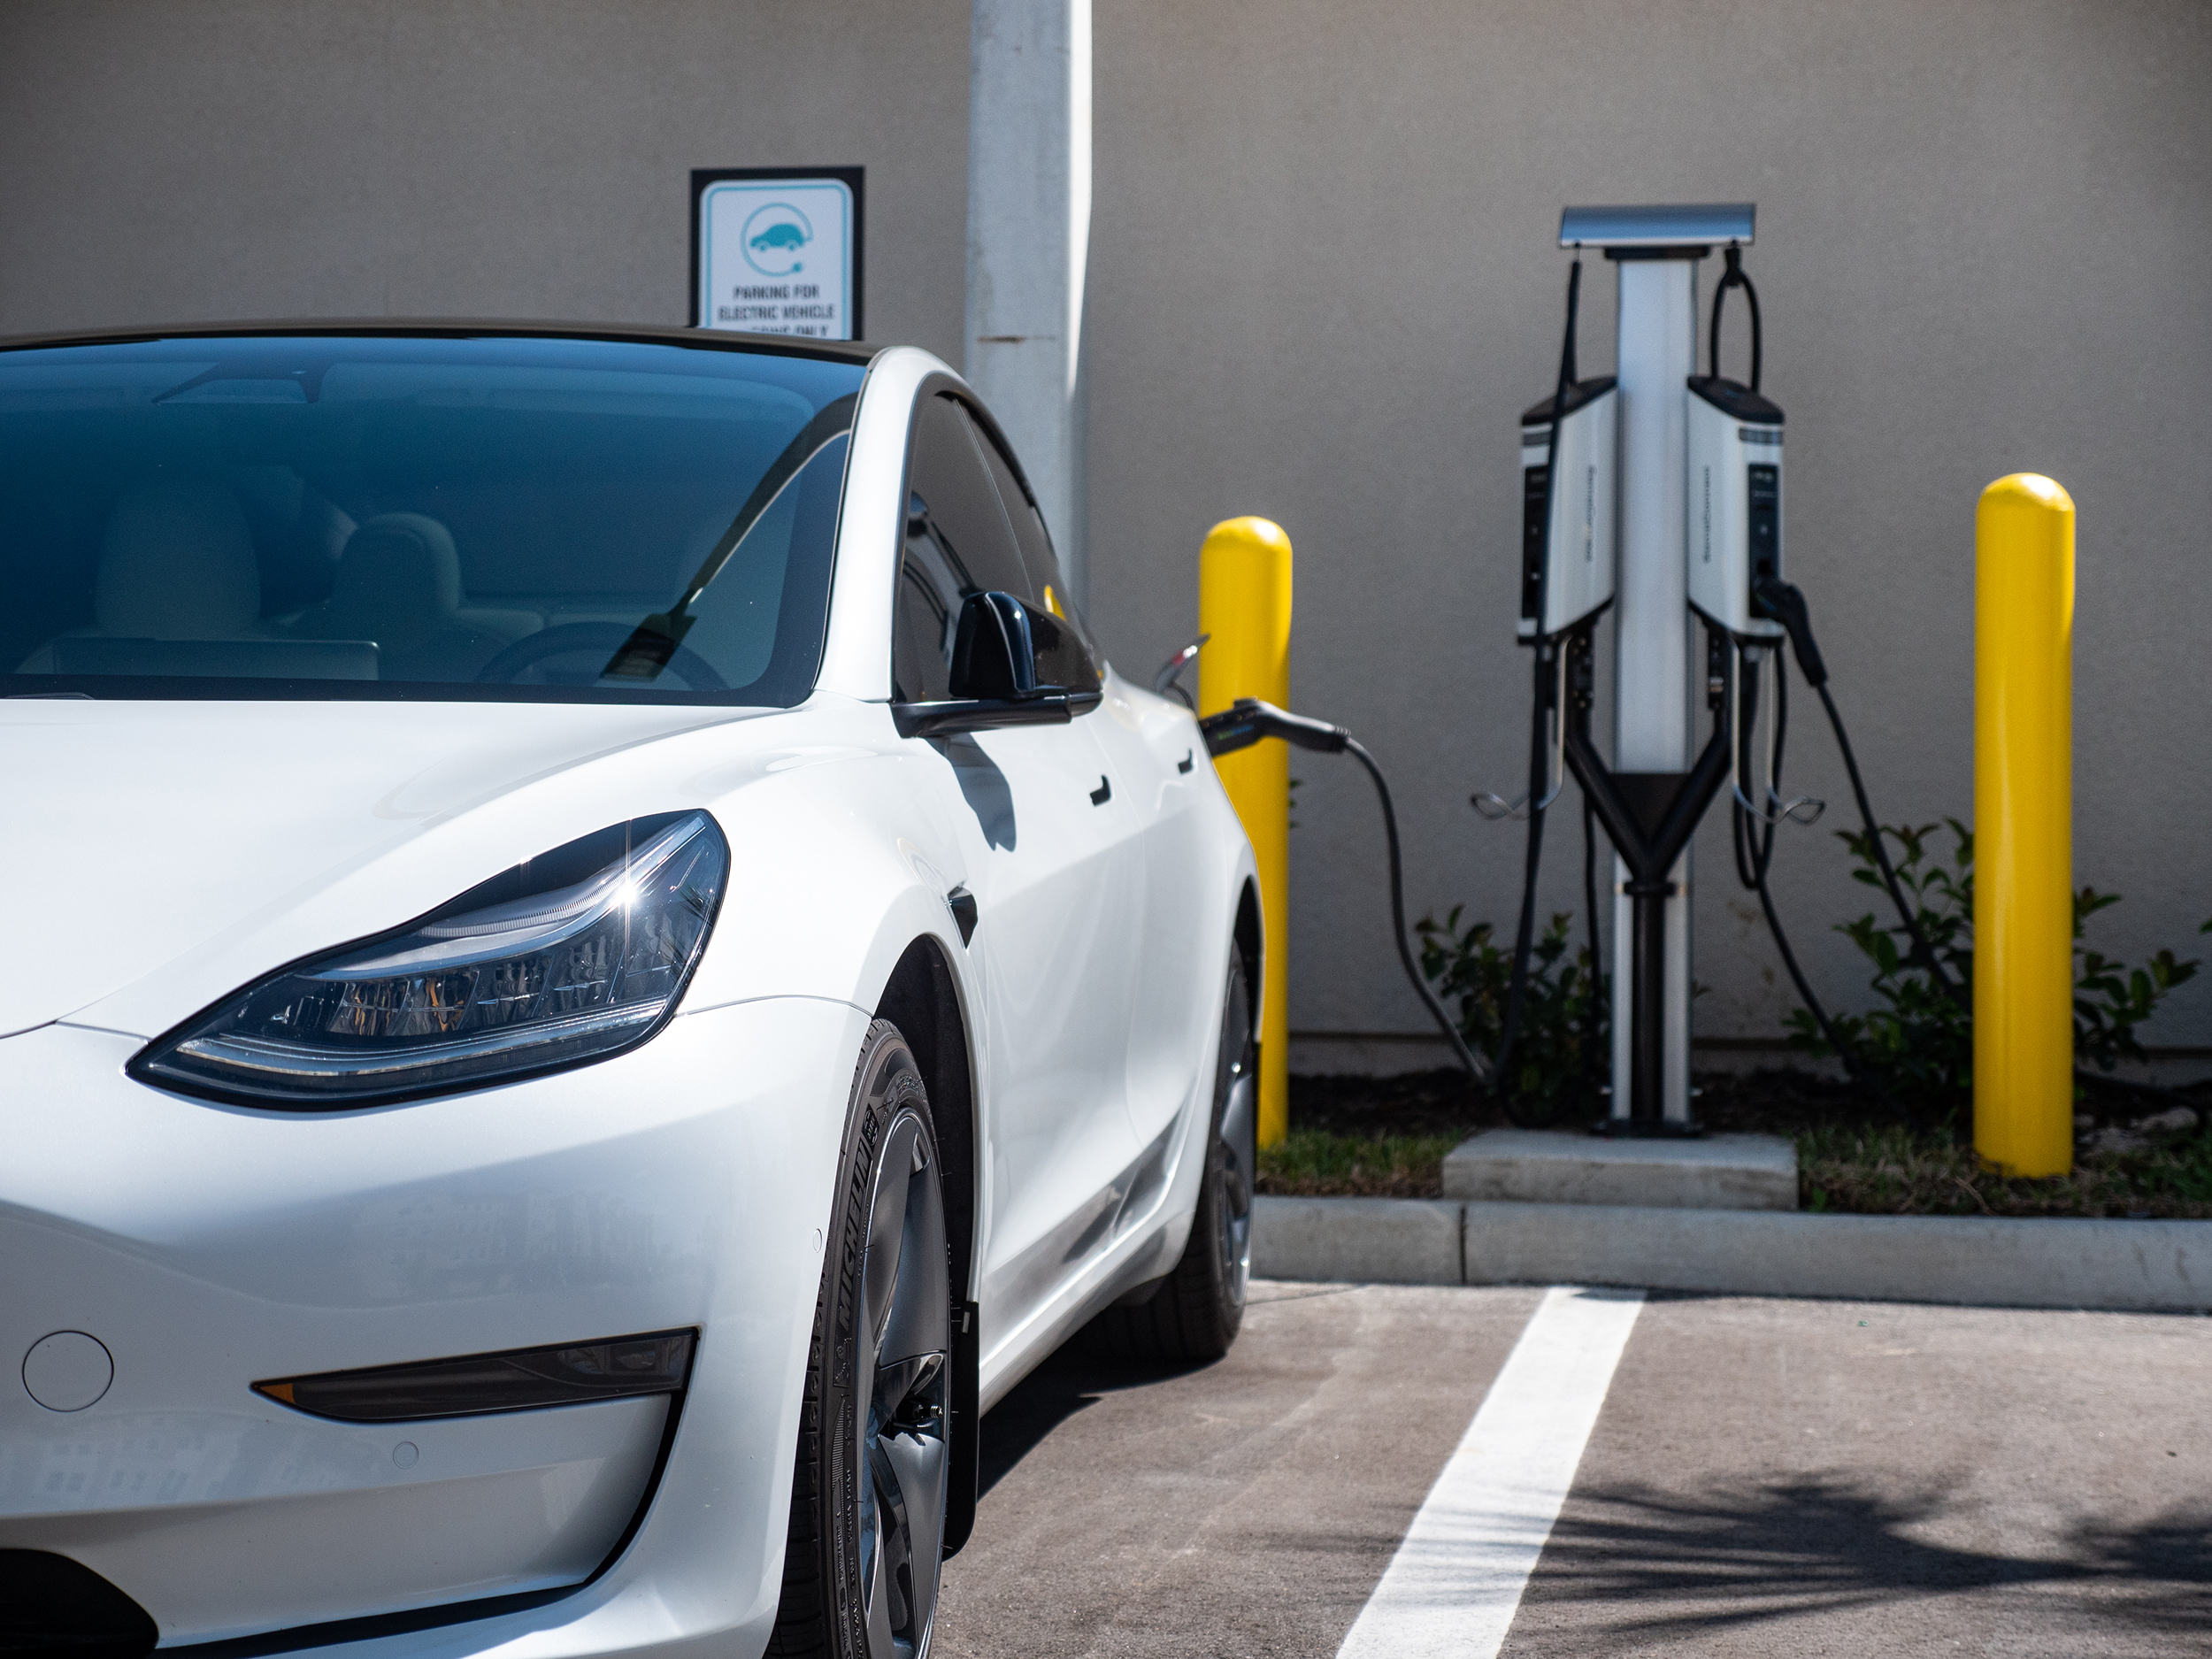 The two new SemaConnect charging stations at the Murano at Three Oaks are compatible with all new and upcoming plug-in electric vehicles in North America.